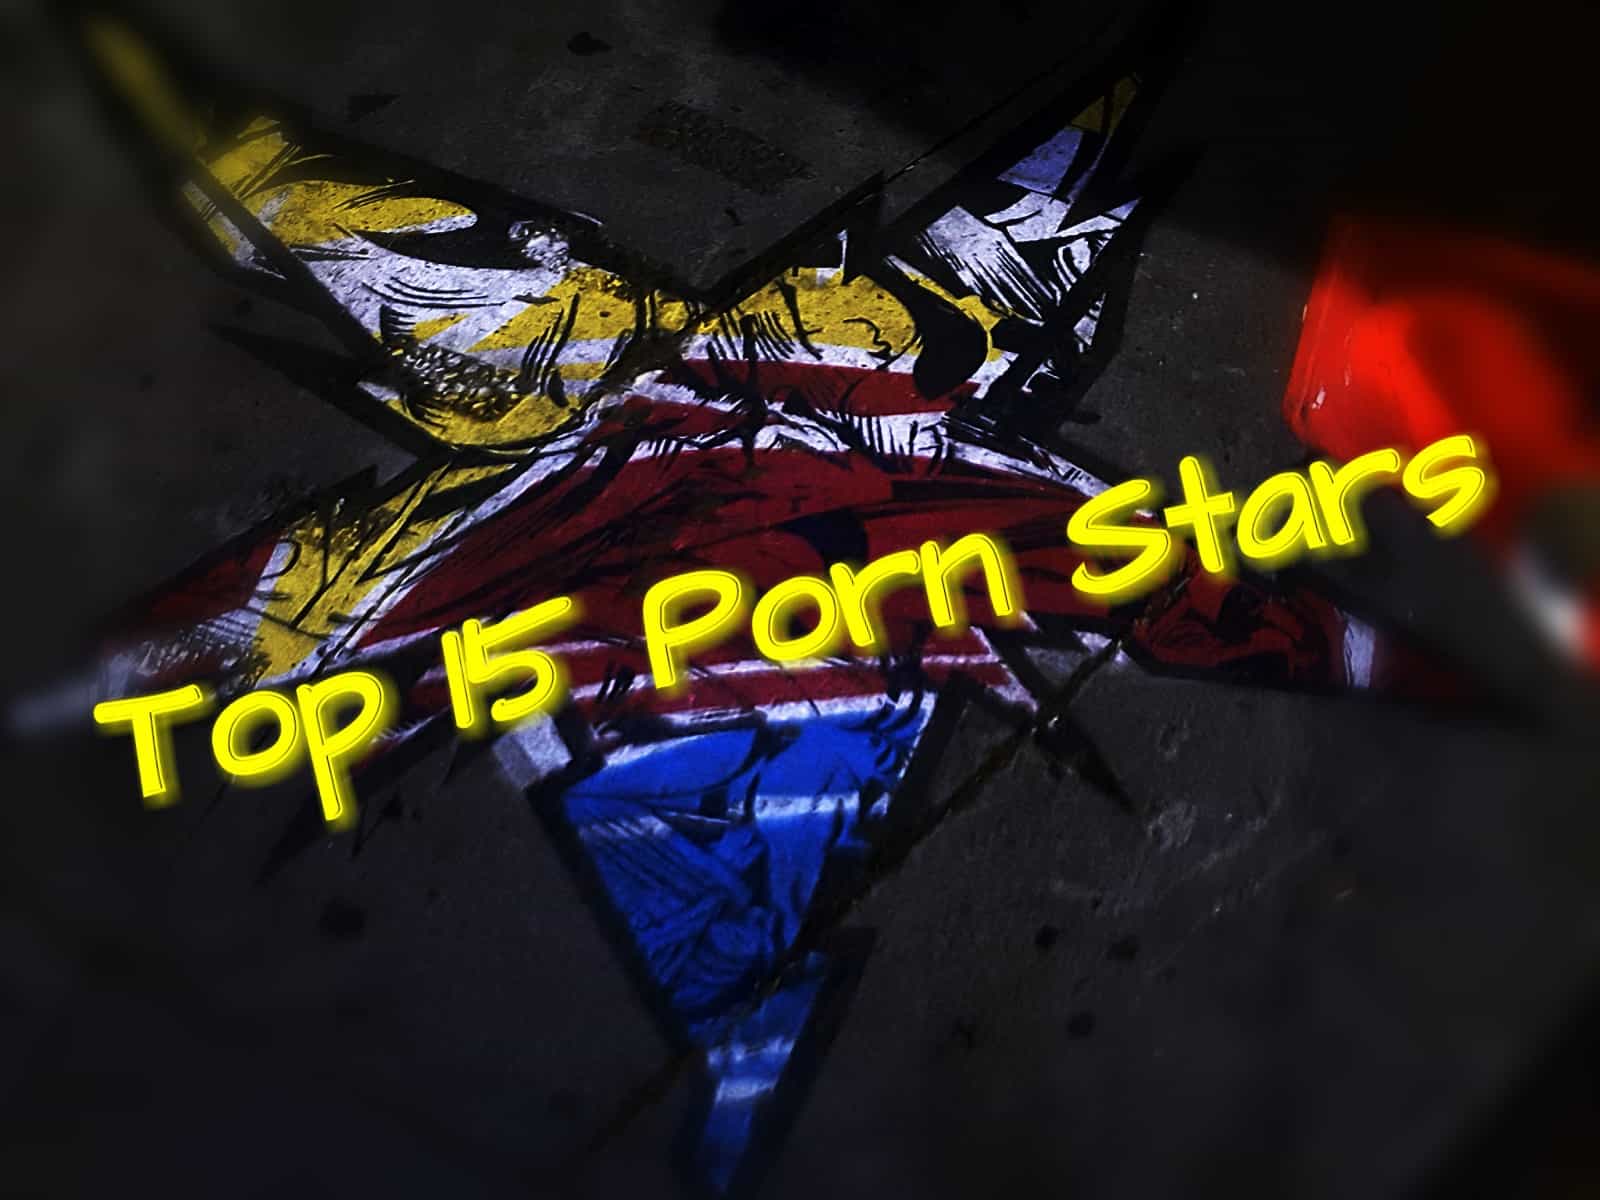 First Rank Porn Star - The Top 15 Porn Stars Today - The Hareald